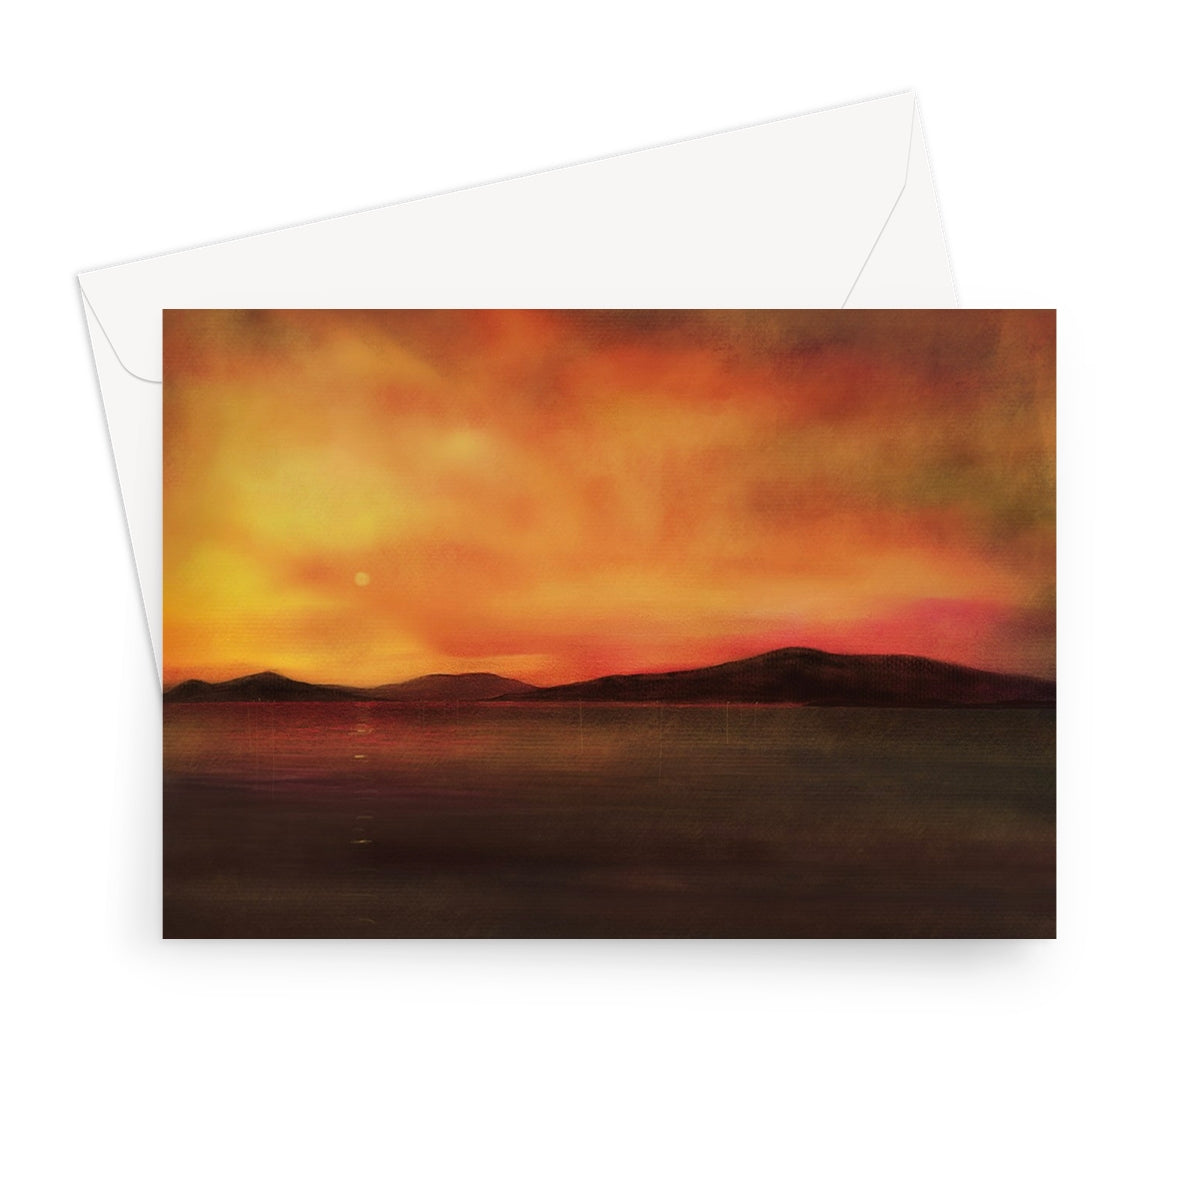 Harris Sunset Art Gifts Greeting Card-Greetings Cards-Hebridean Islands Art Gallery-7"x5"-1 Card-Paintings, Prints, Homeware, Art Gifts From Scotland By Scottish Artist Kevin Hunter